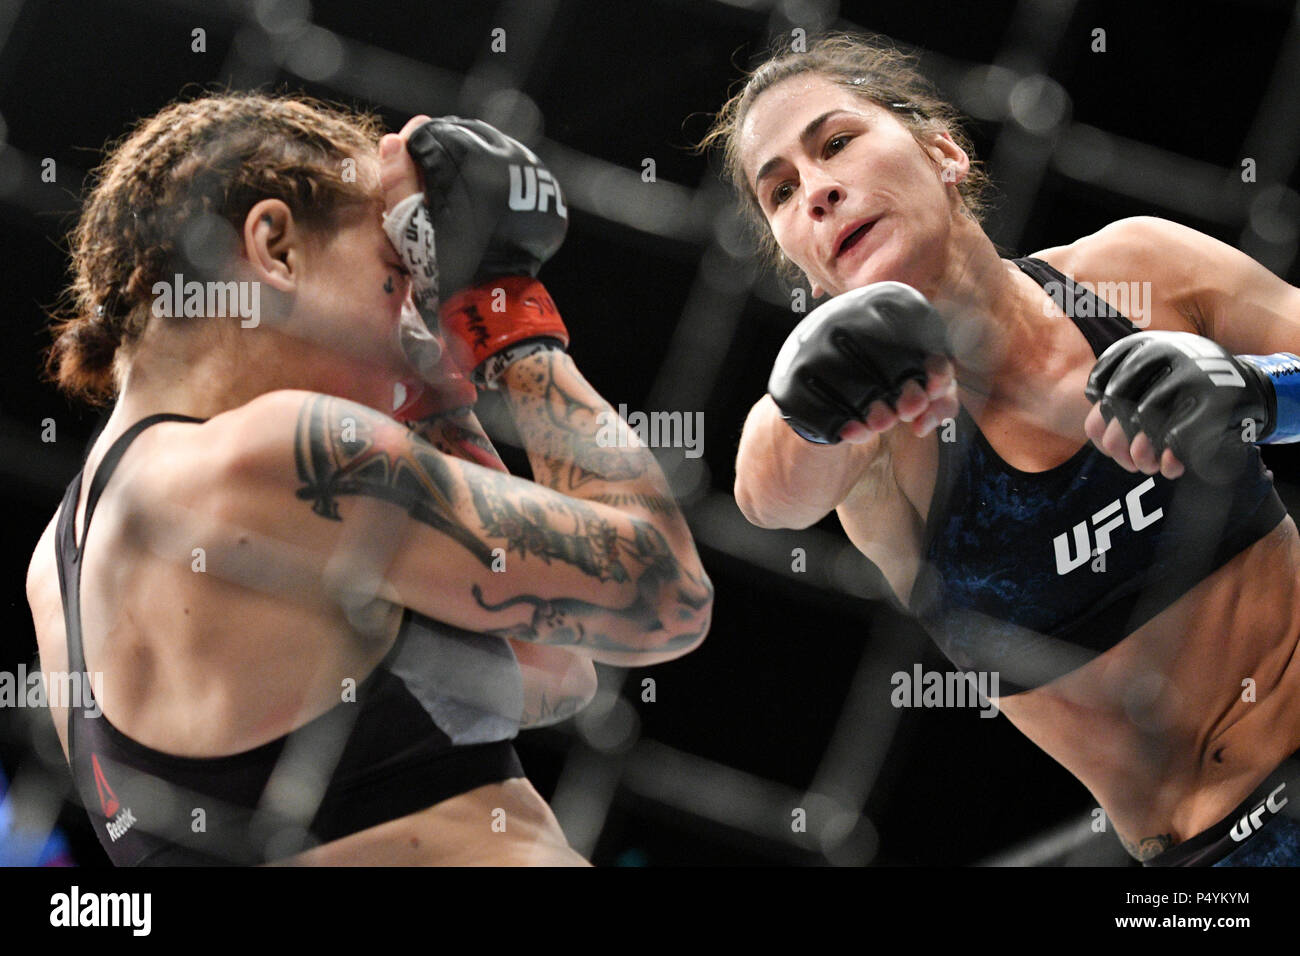 Singapore. 23rd June, 2018. Jessica Eye (R) of the United States fights with Jessica-Rose Clark of Australia during the flyweight bout at the Ultimate Fighting Championship (UFC) in Singapore June 23, 2018. Credit: Then Chih Wey/Xinhua/Alamy Live News Stock Photo